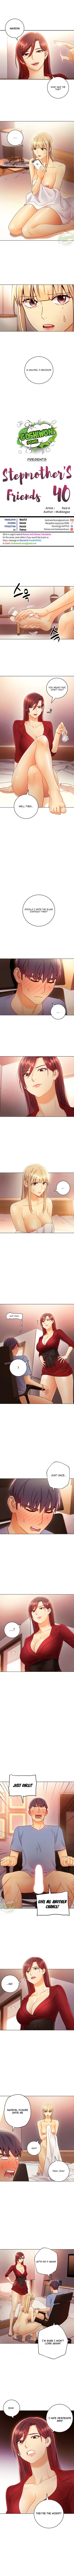 Panel Image 1 for chapter 40 of manhwa Stepmother